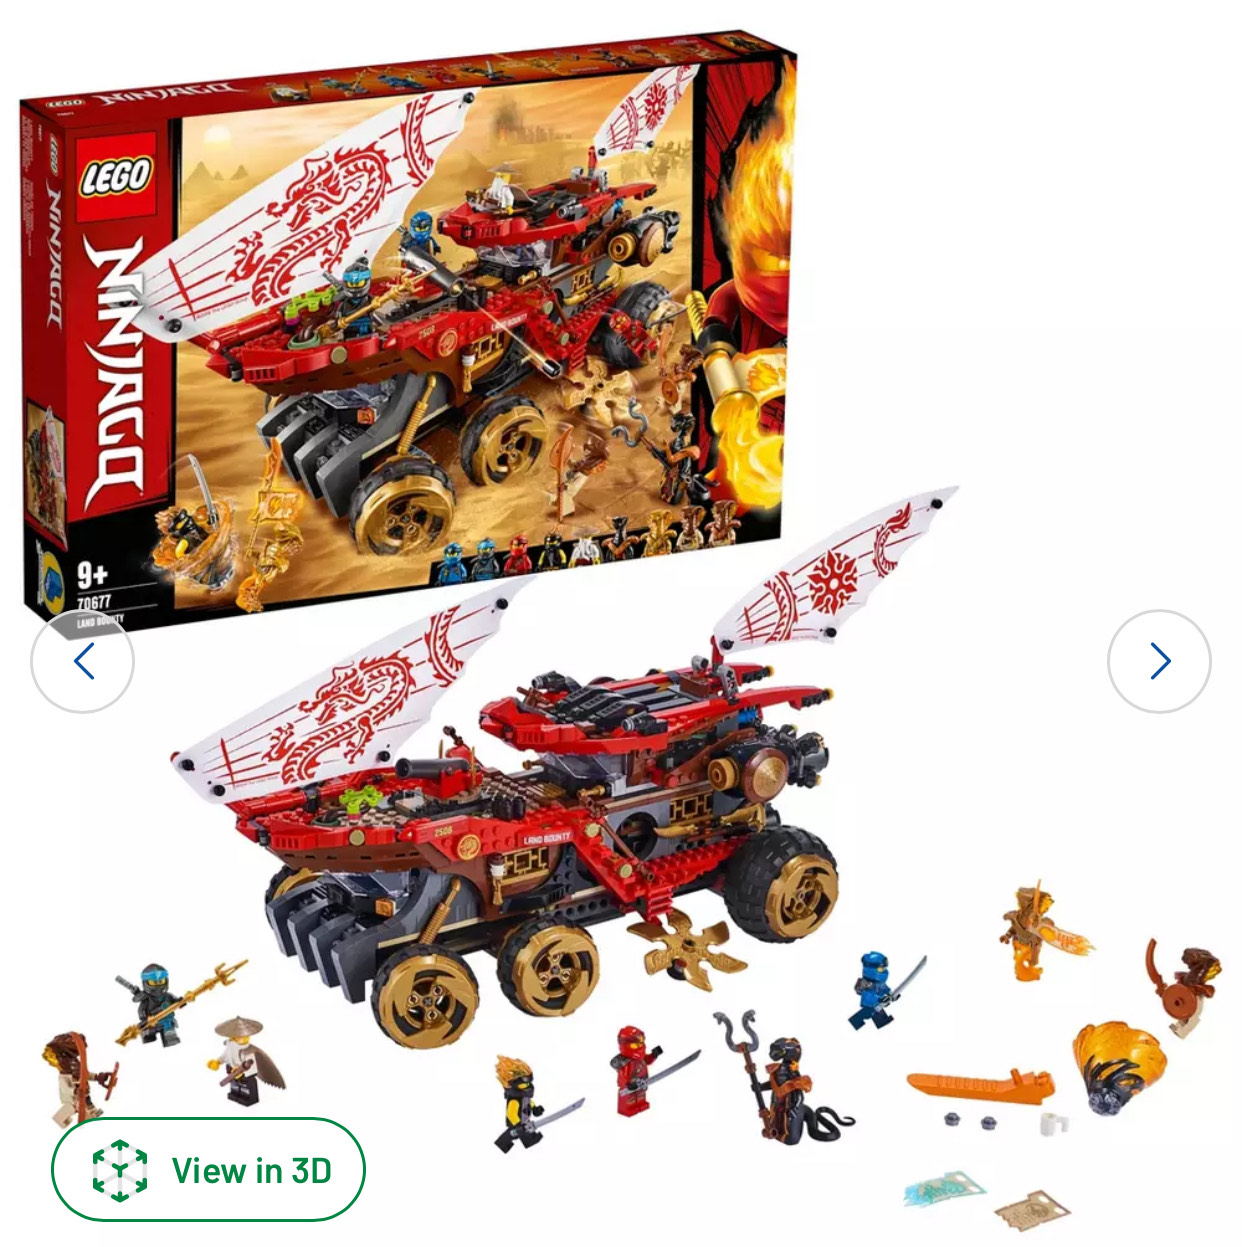 Argos Lego Switch Games Clearance, 51% OFF |